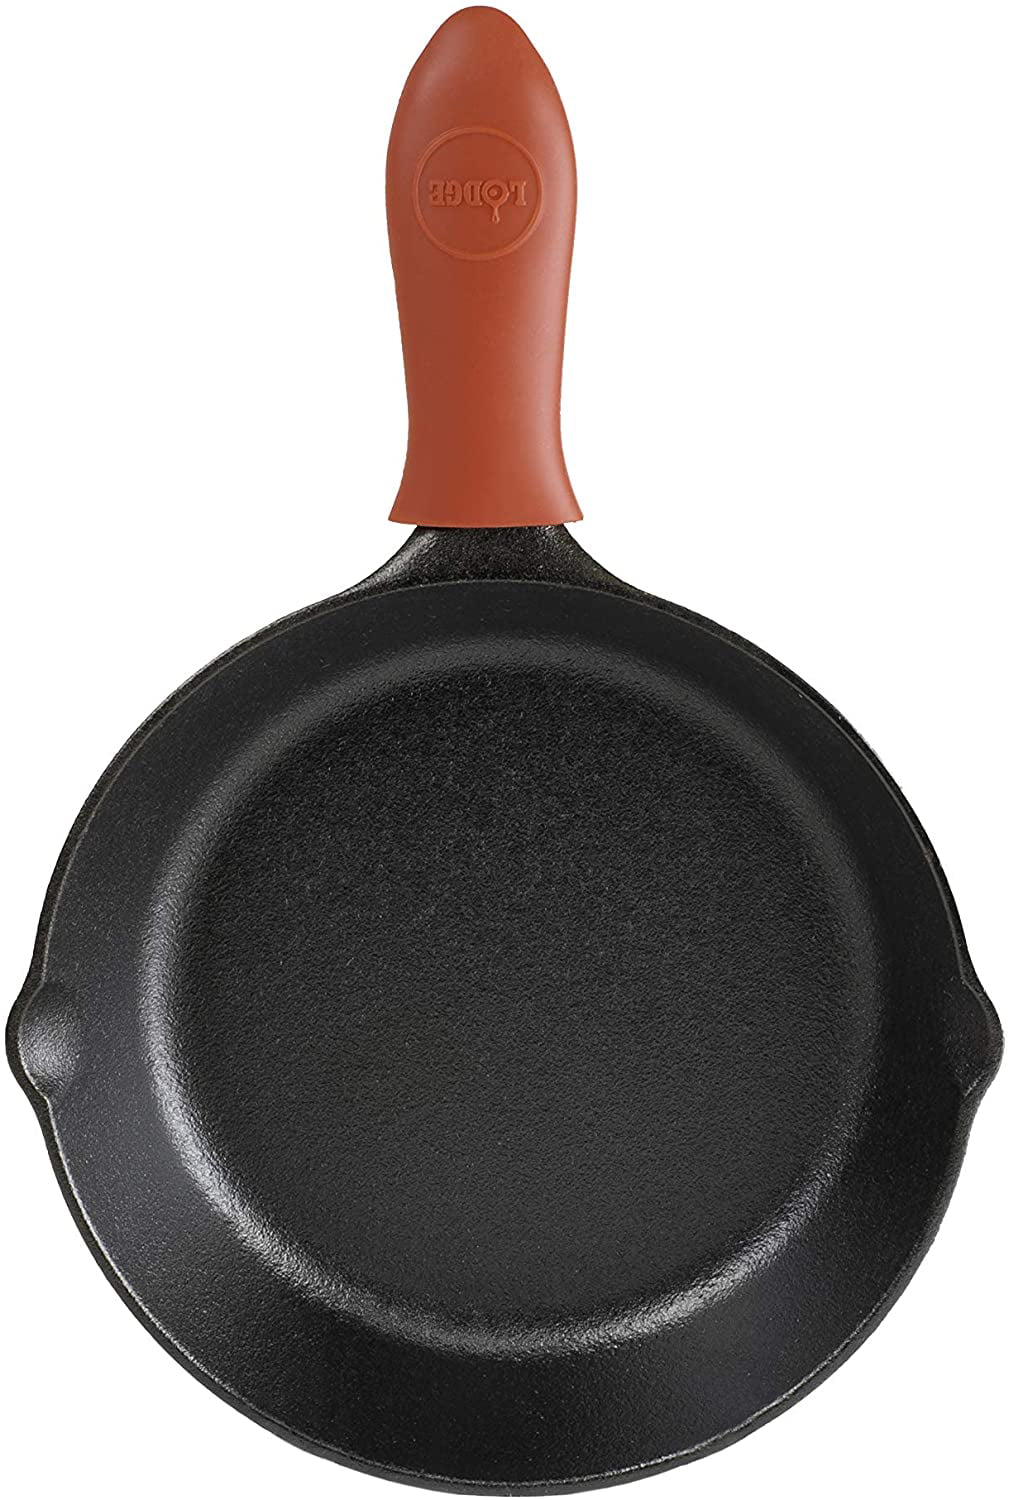 Lodge Cast Iron Round Griddle with Red Silicone Hot Handle Holder